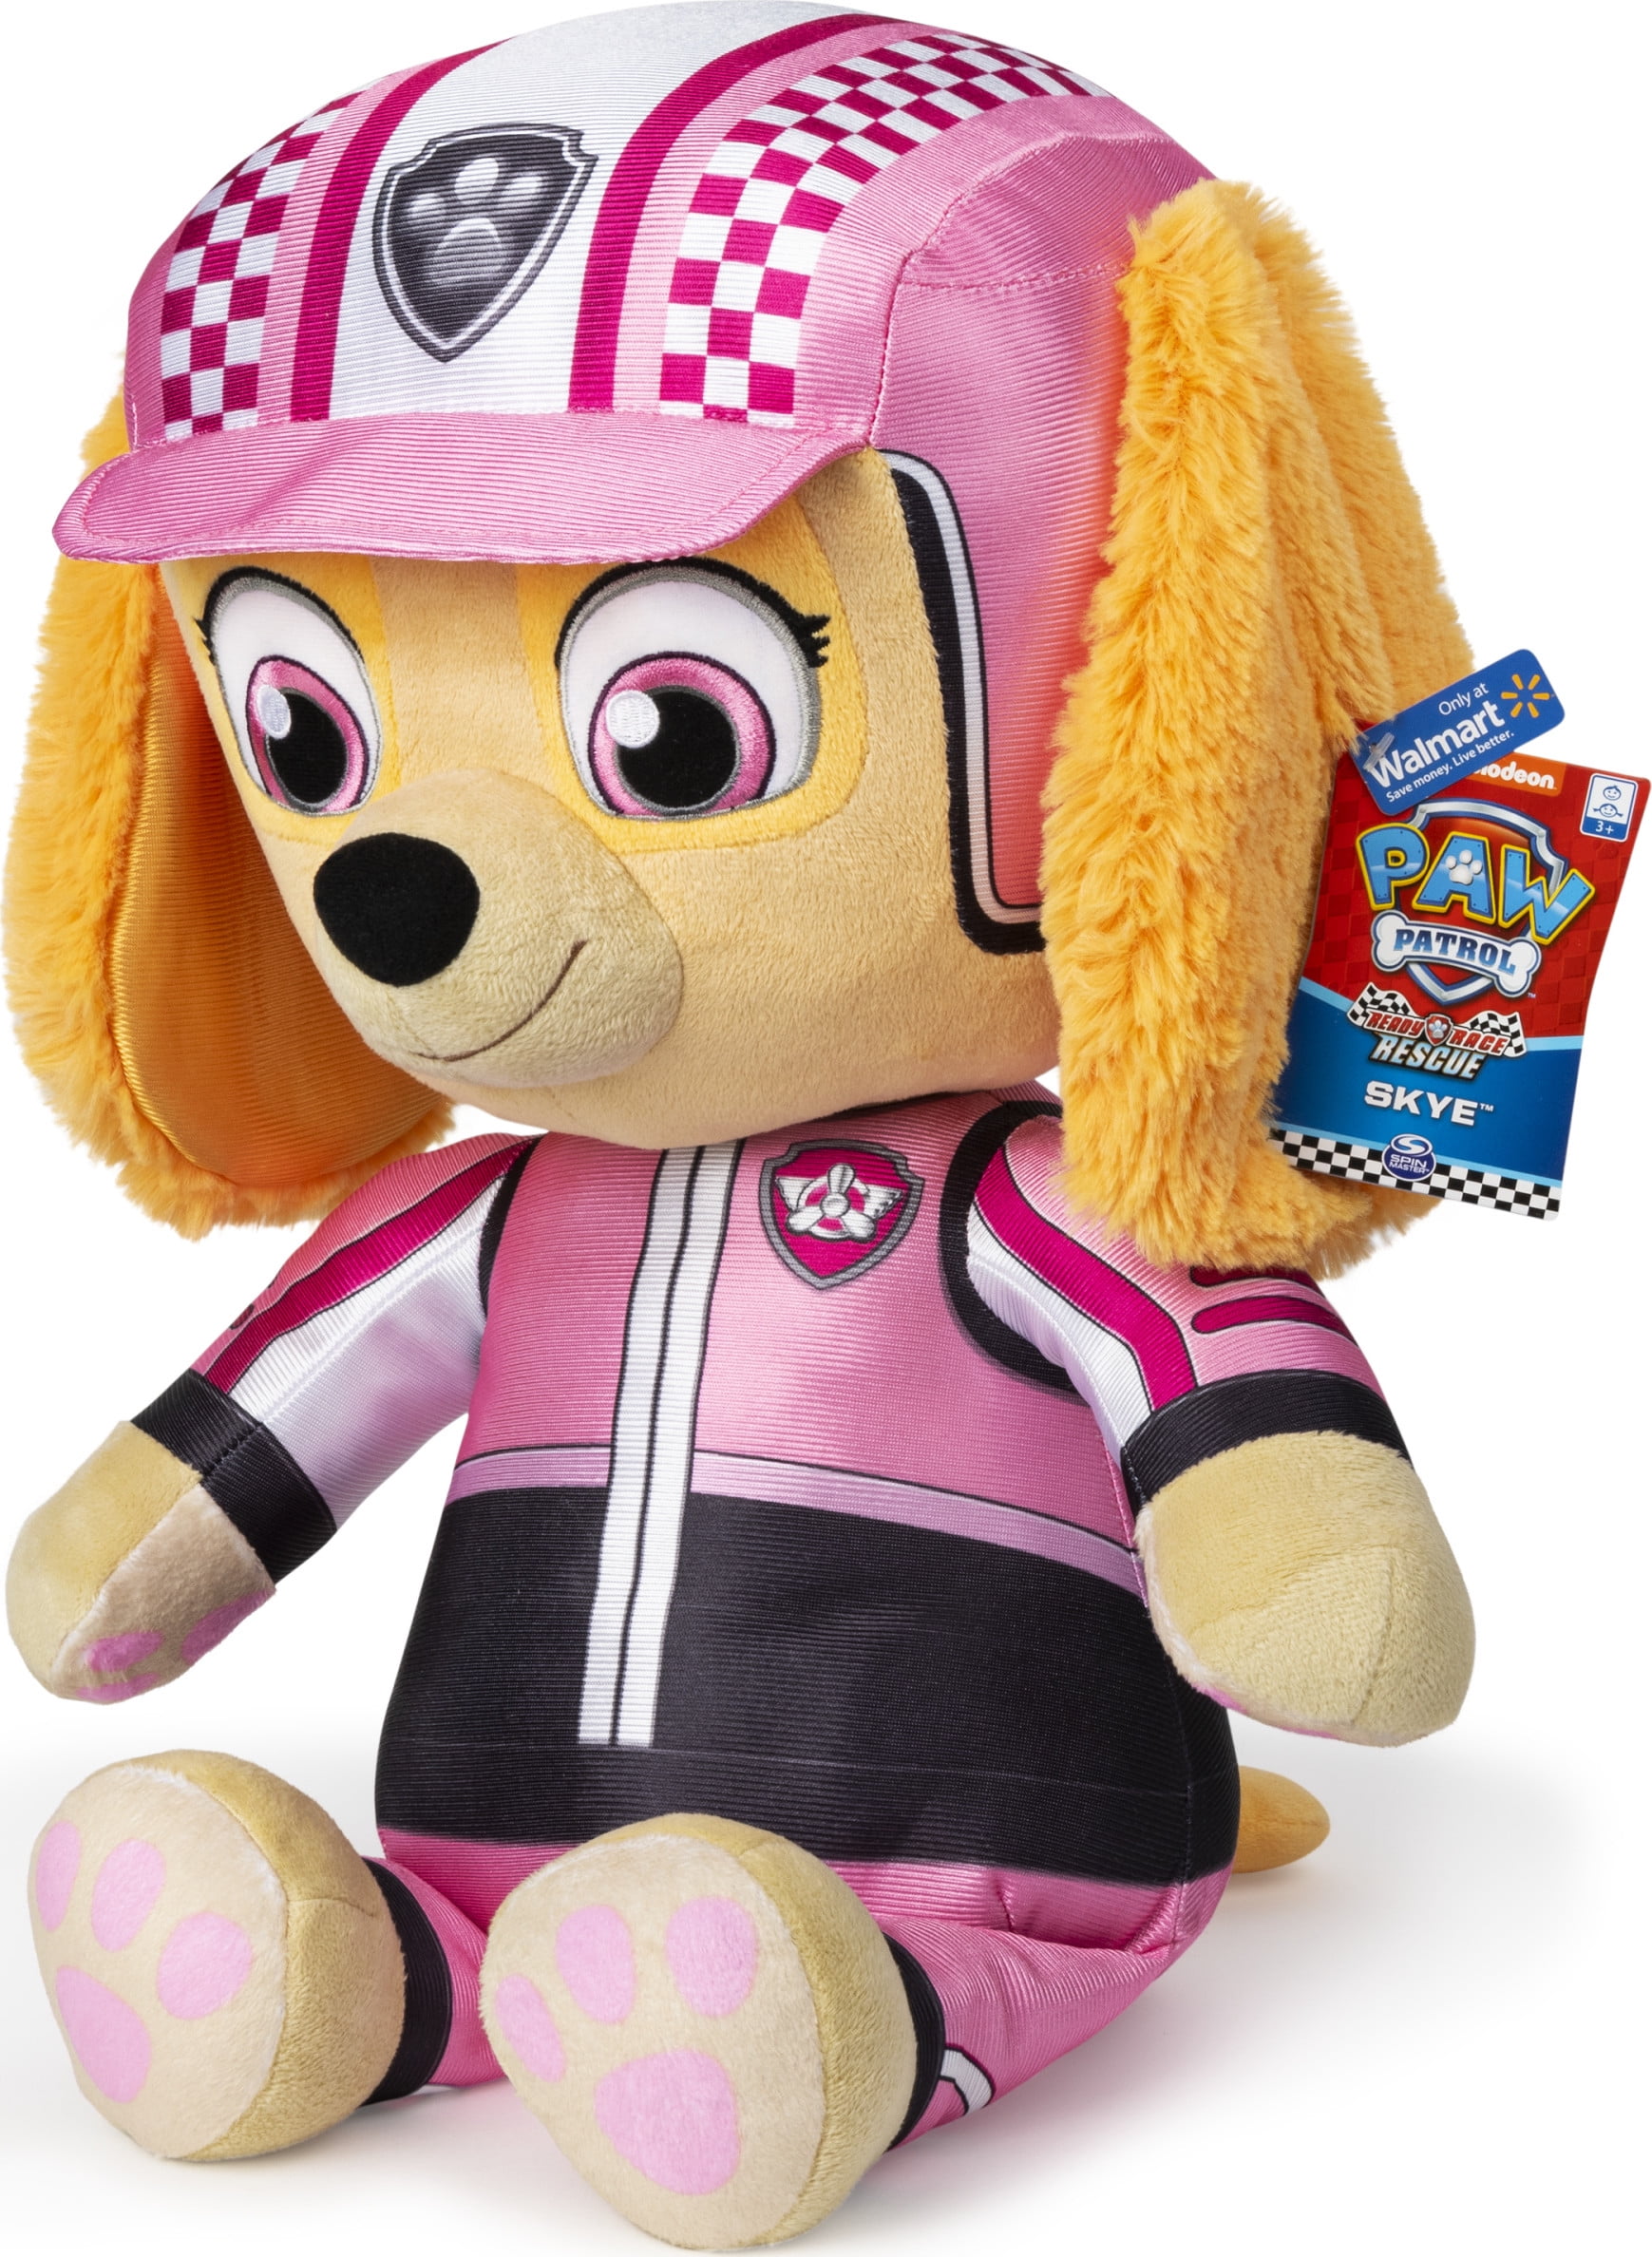 PAW Patrol, 24-Inch Ready, Race, Rescue Skye Jumbo Plush, Walmart  Exclusive, for Ages 3 and Up 